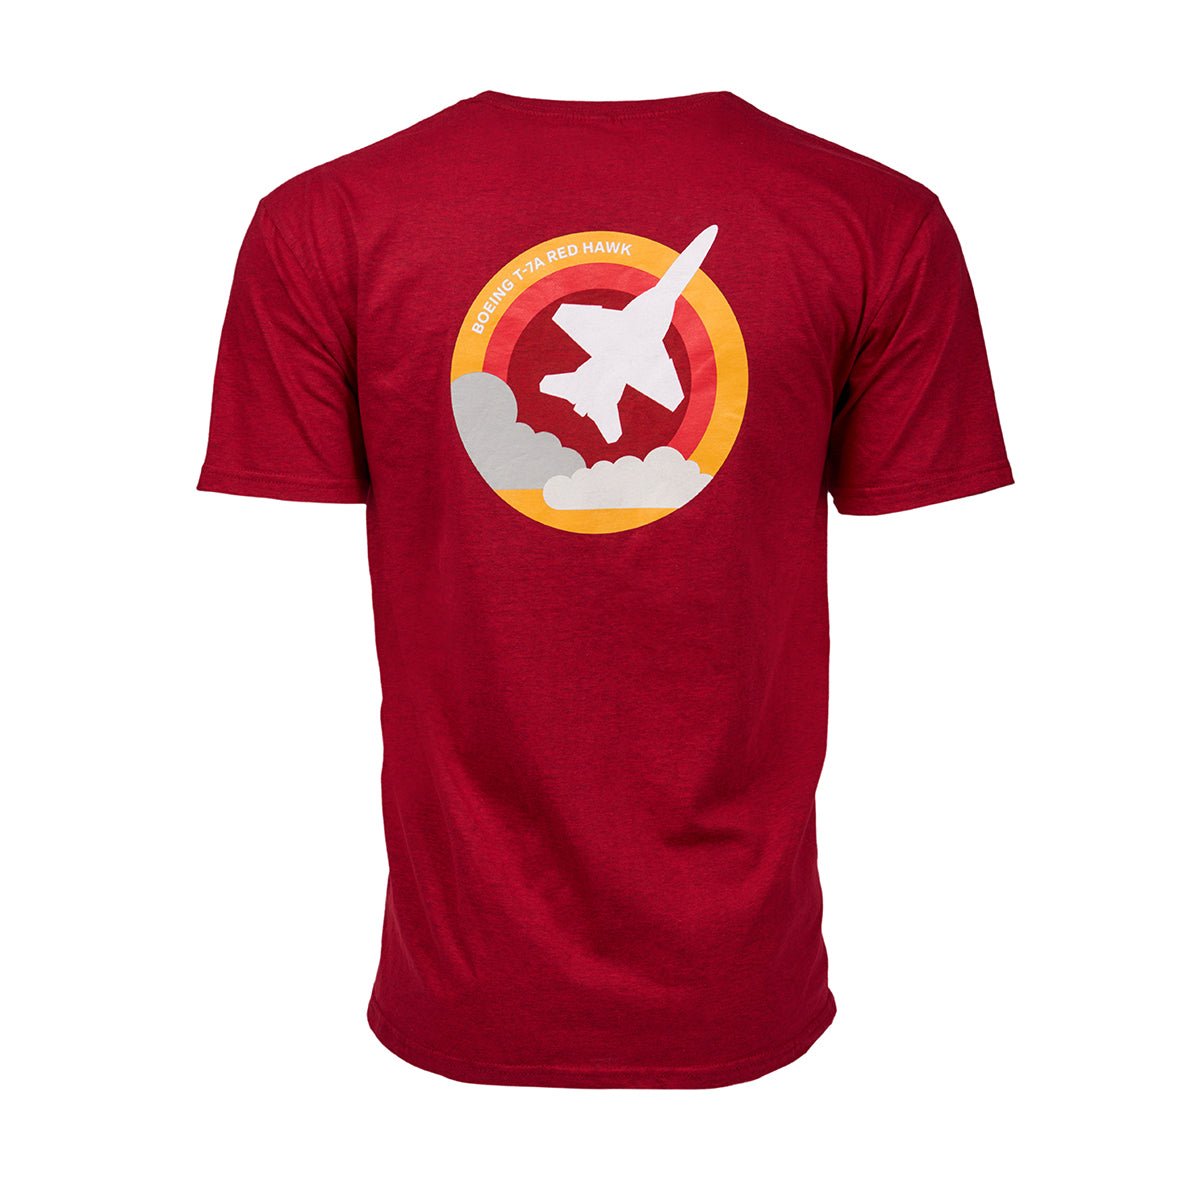 Full product image of the back side of the t-shirt in a red color.  Showing the Skyward graphic of the Boeing T-7A Red Hawk.